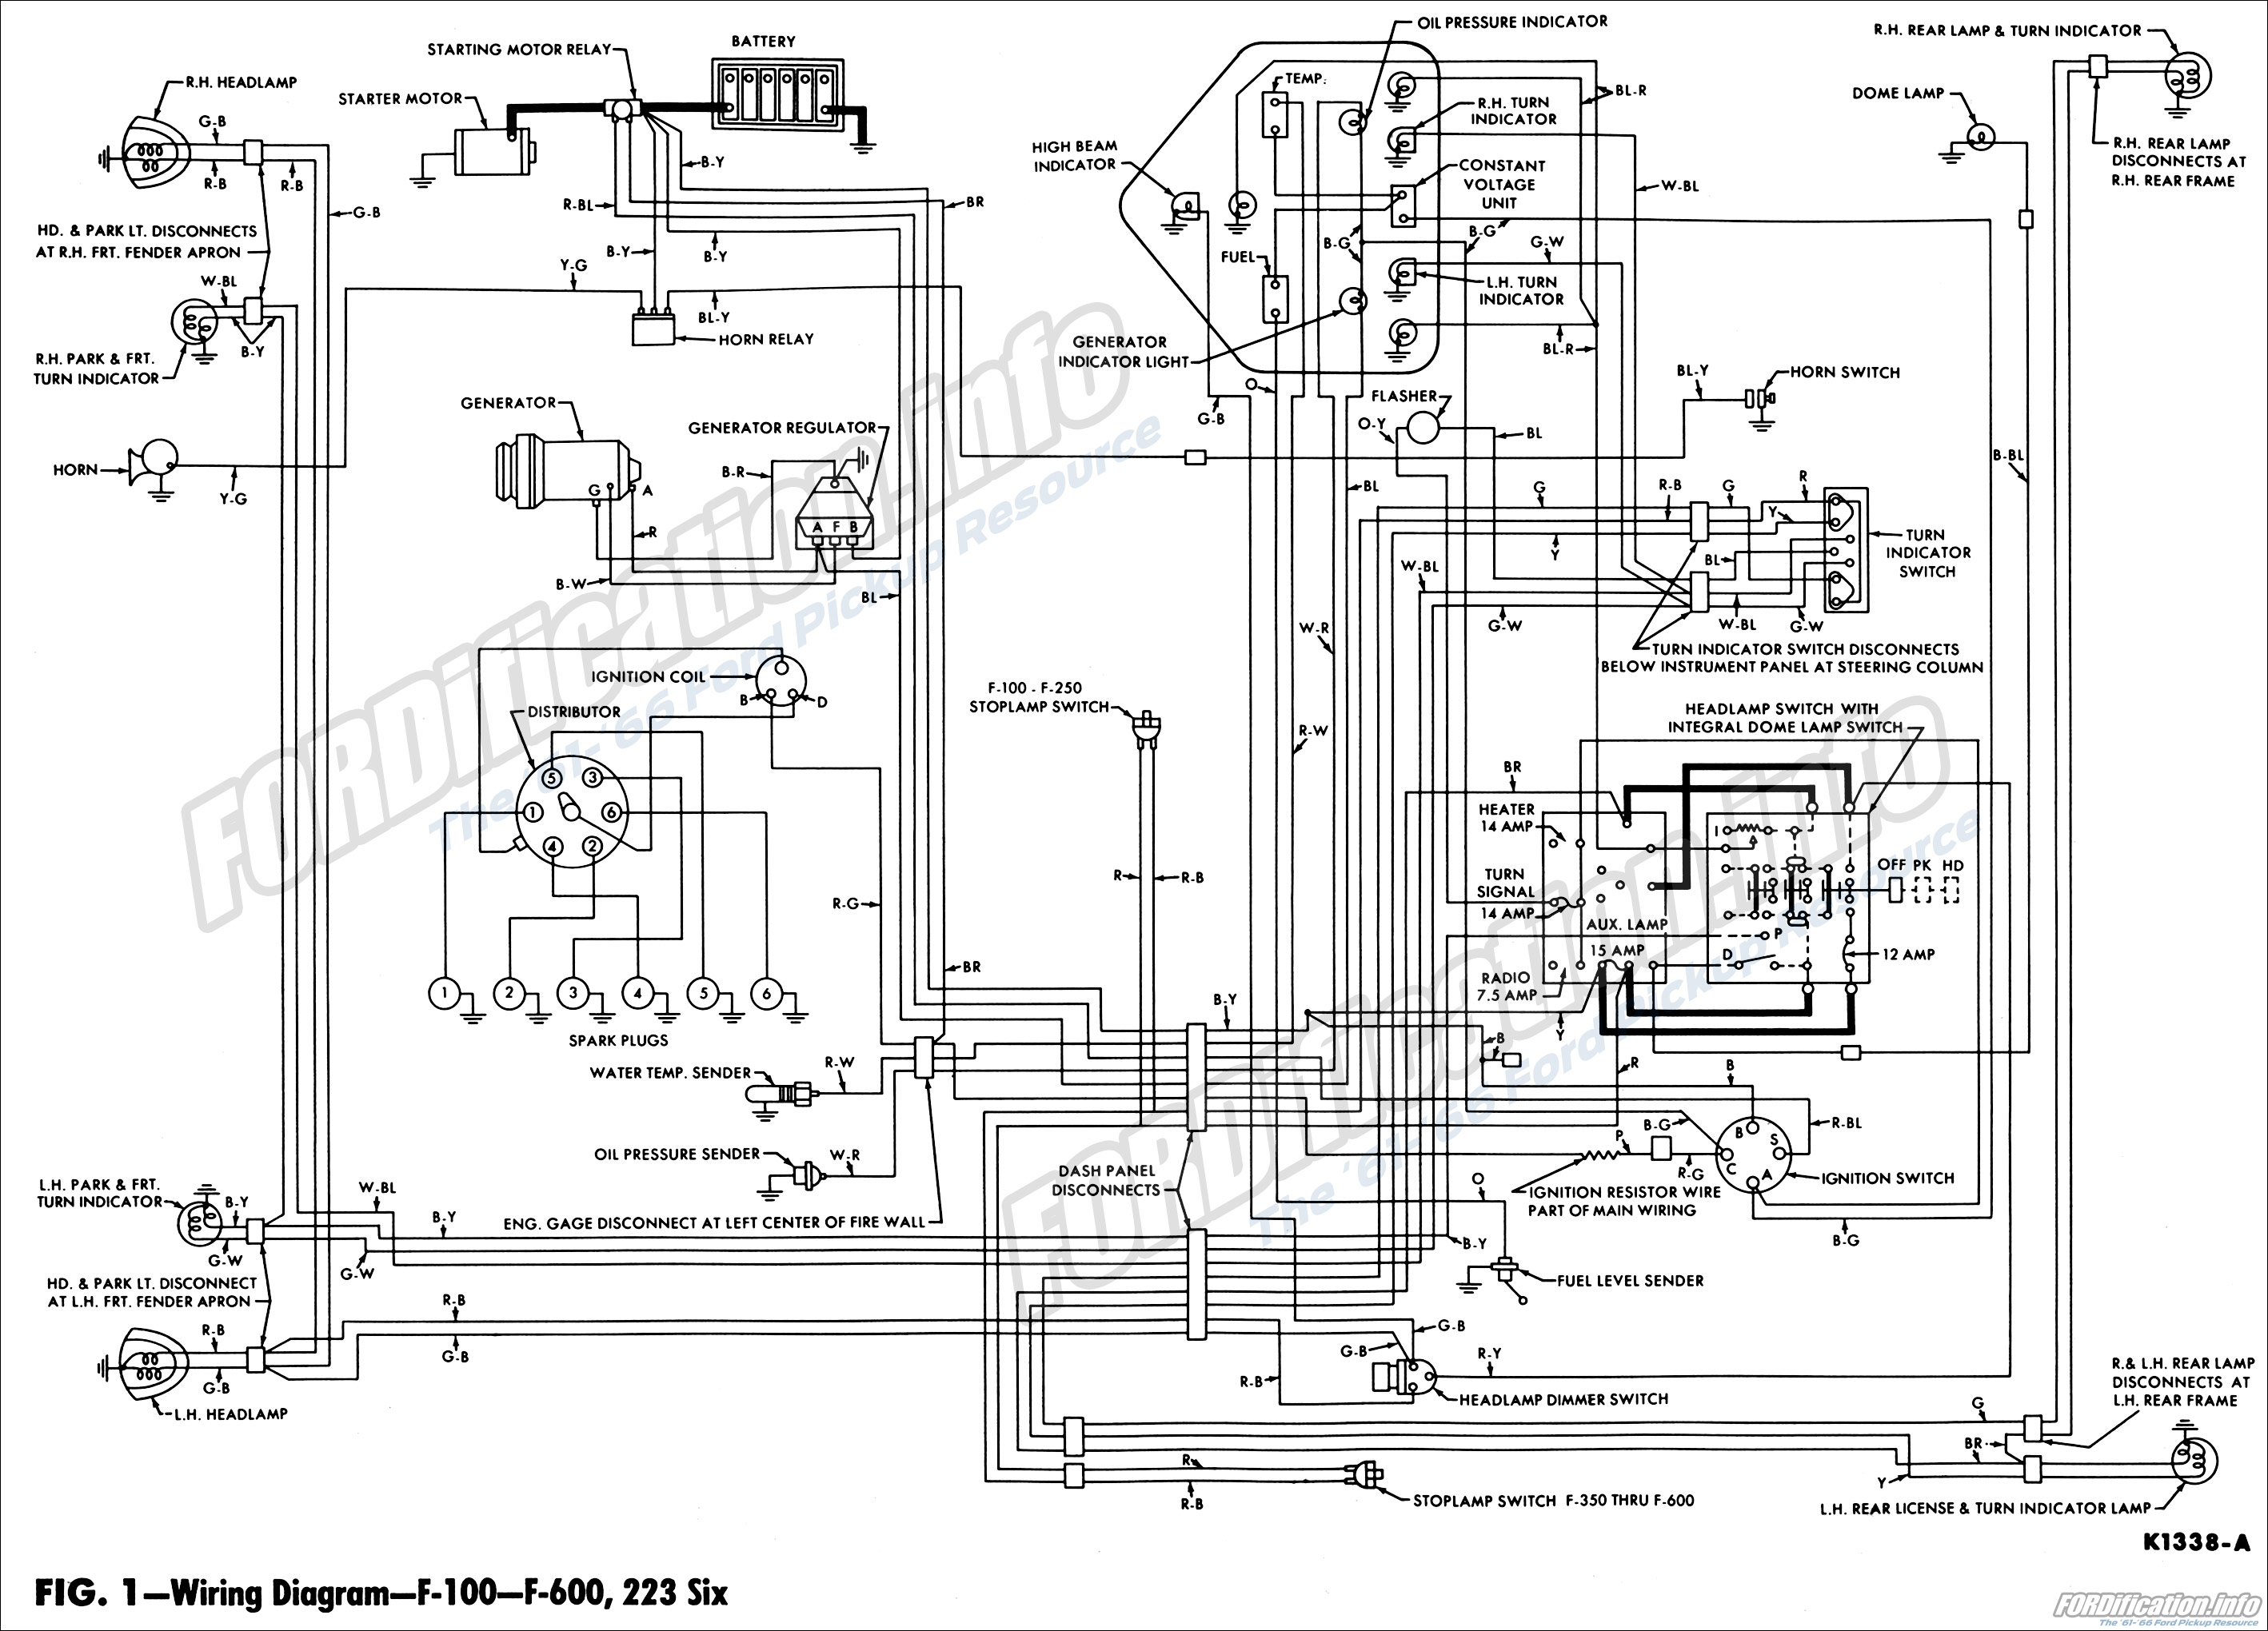 1962 Ford Truck Wiring Diagrams - FORDification.info - The '61-'66 Ford